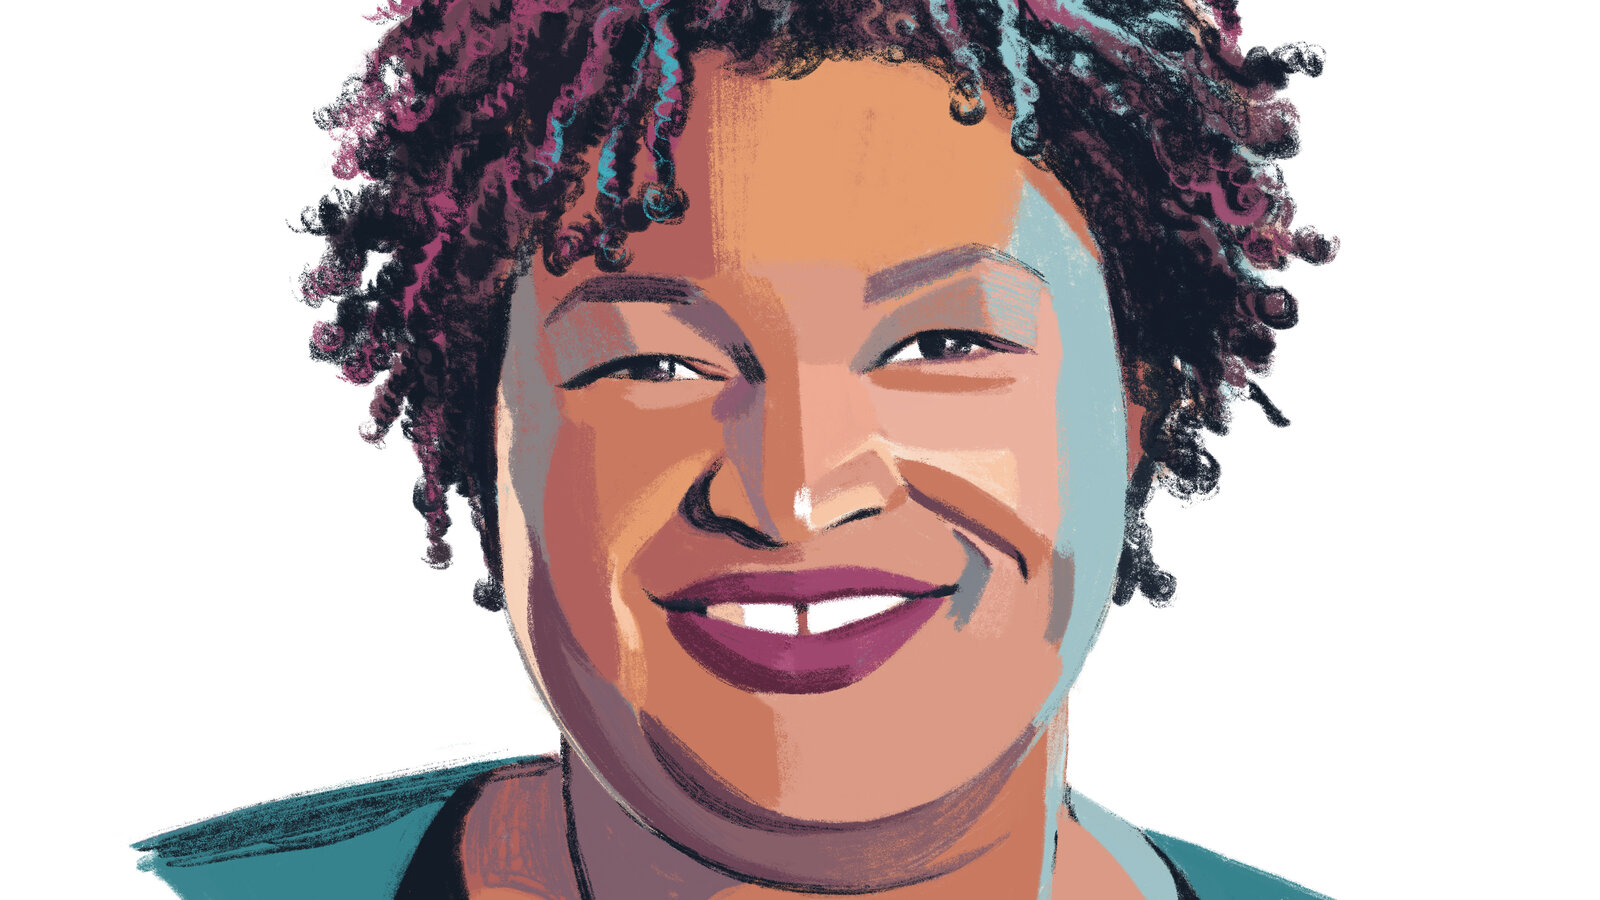 stacey abrams while justice sleeps review